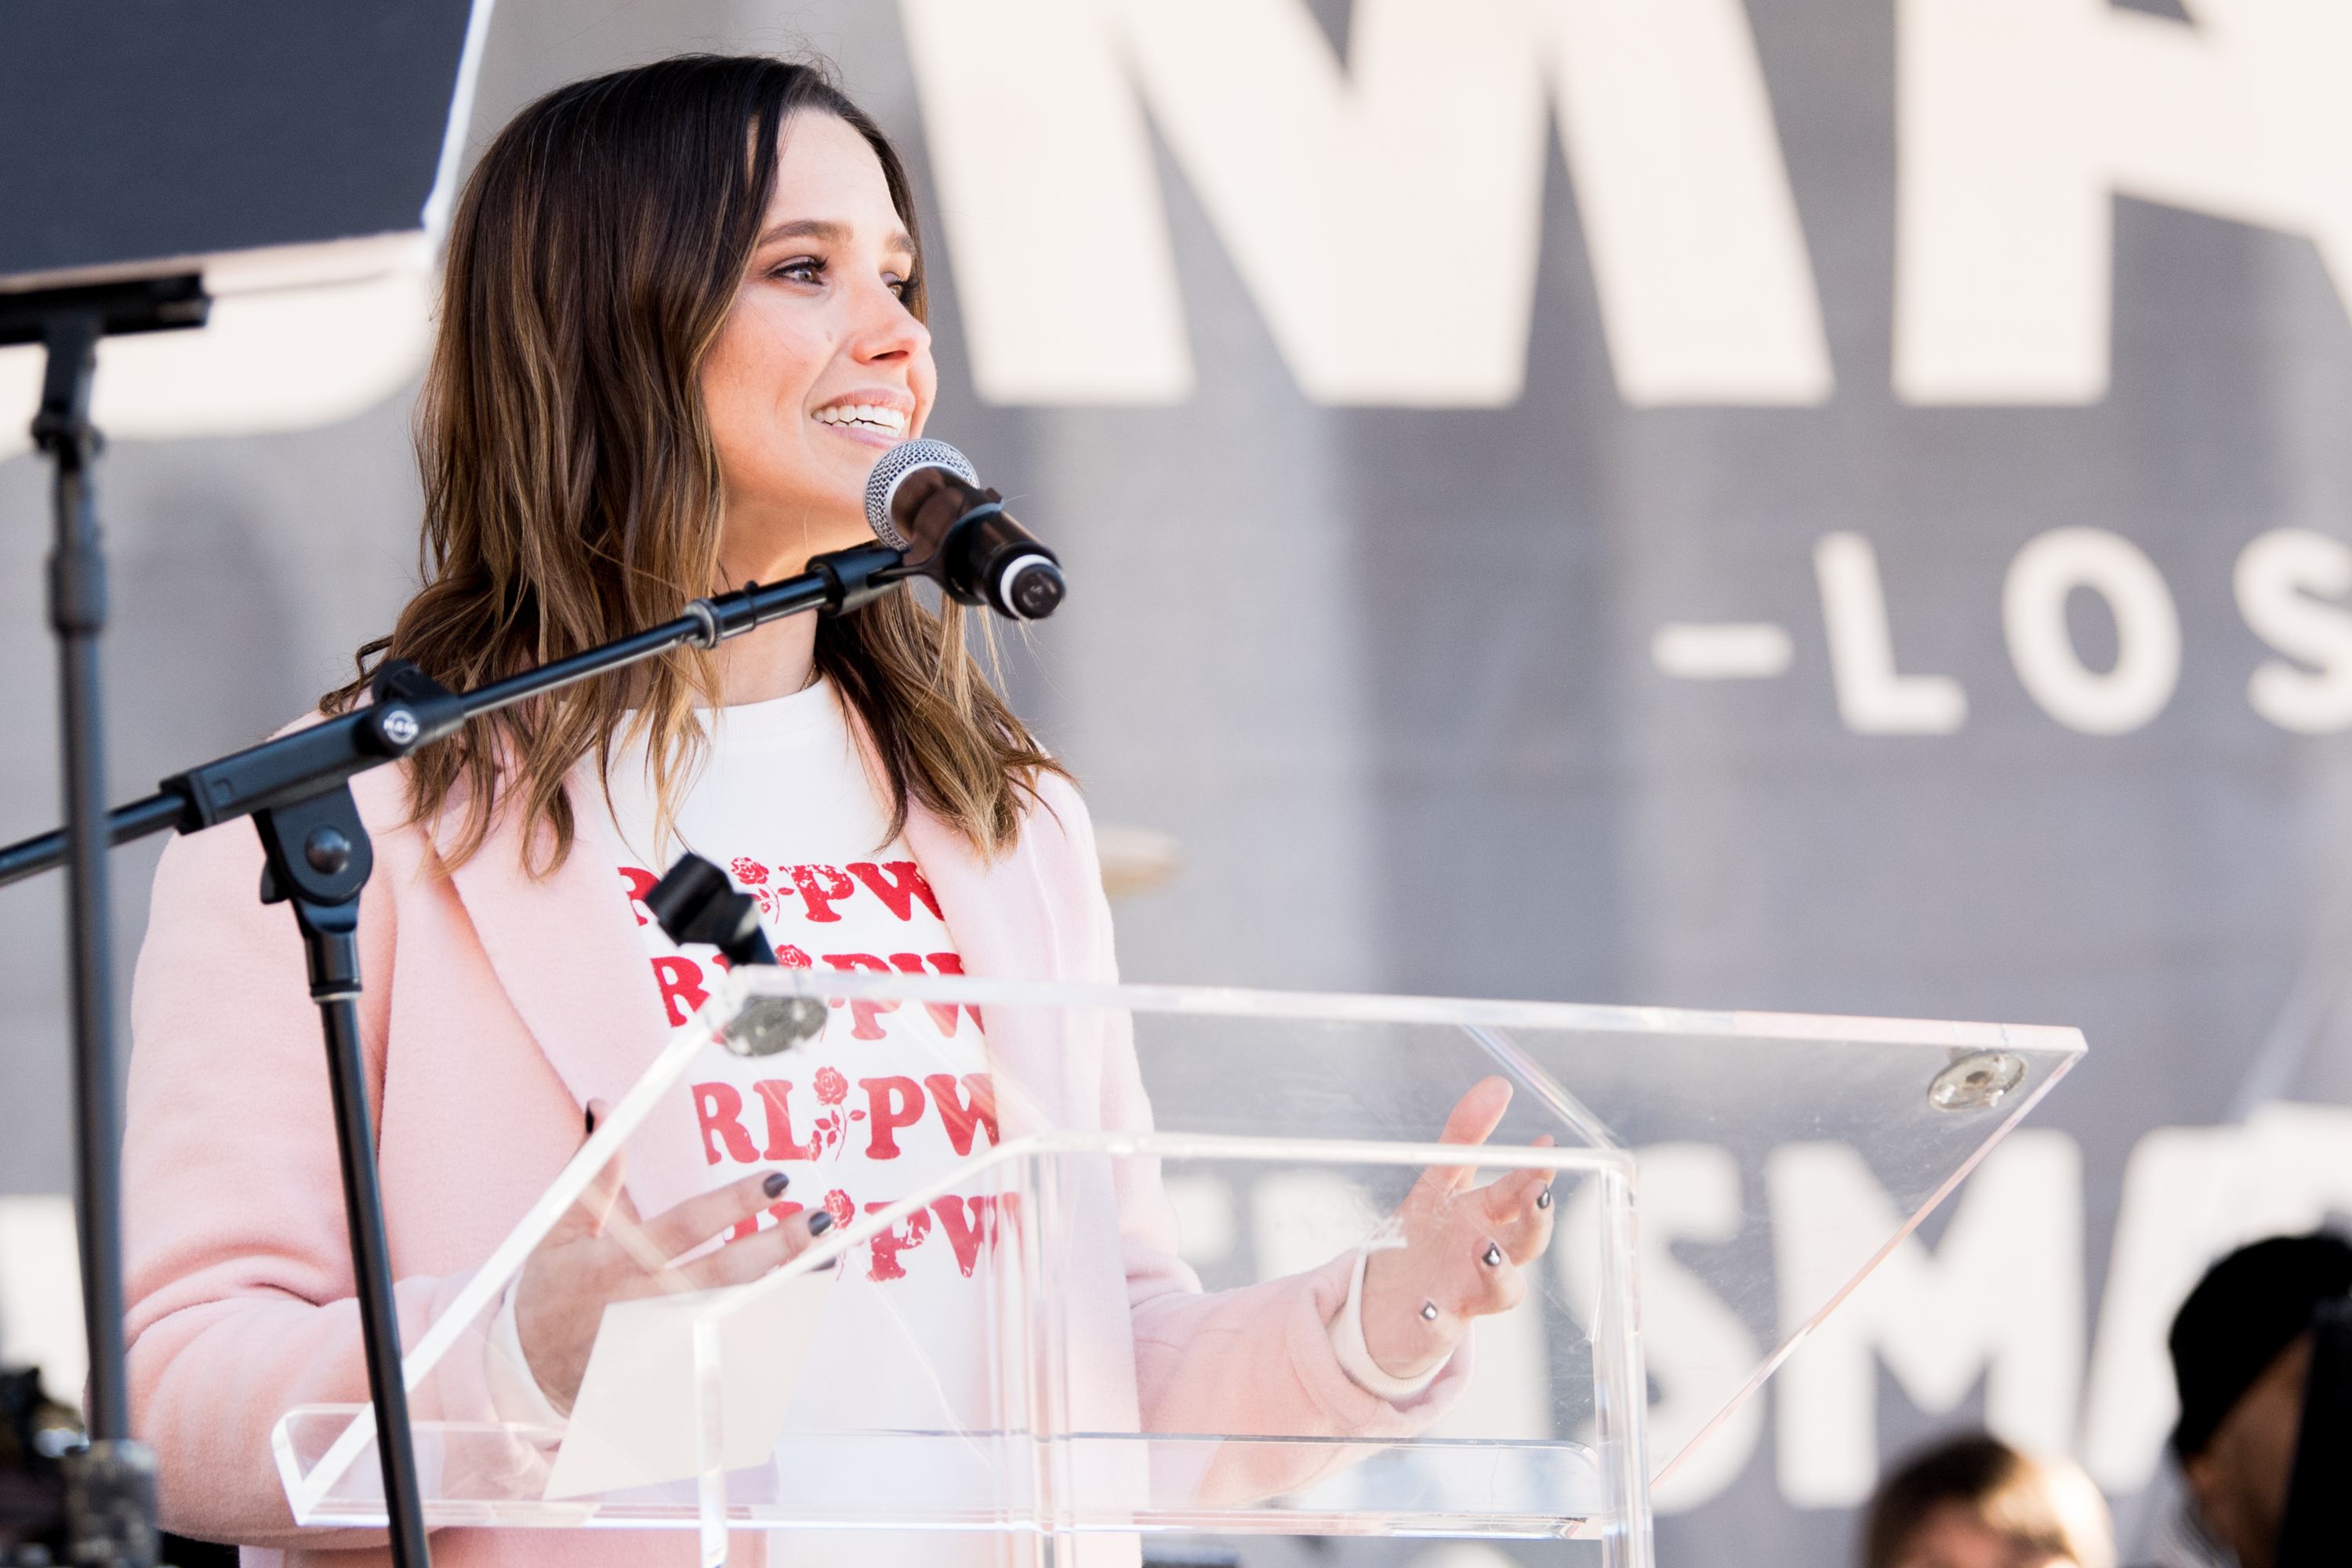 Actress Sophia Bush speaks onstage at the women's march Los Angeles on January 20, 2018 in Los Angeles, California. (Photo by Emma McIntyre/Getty Images)